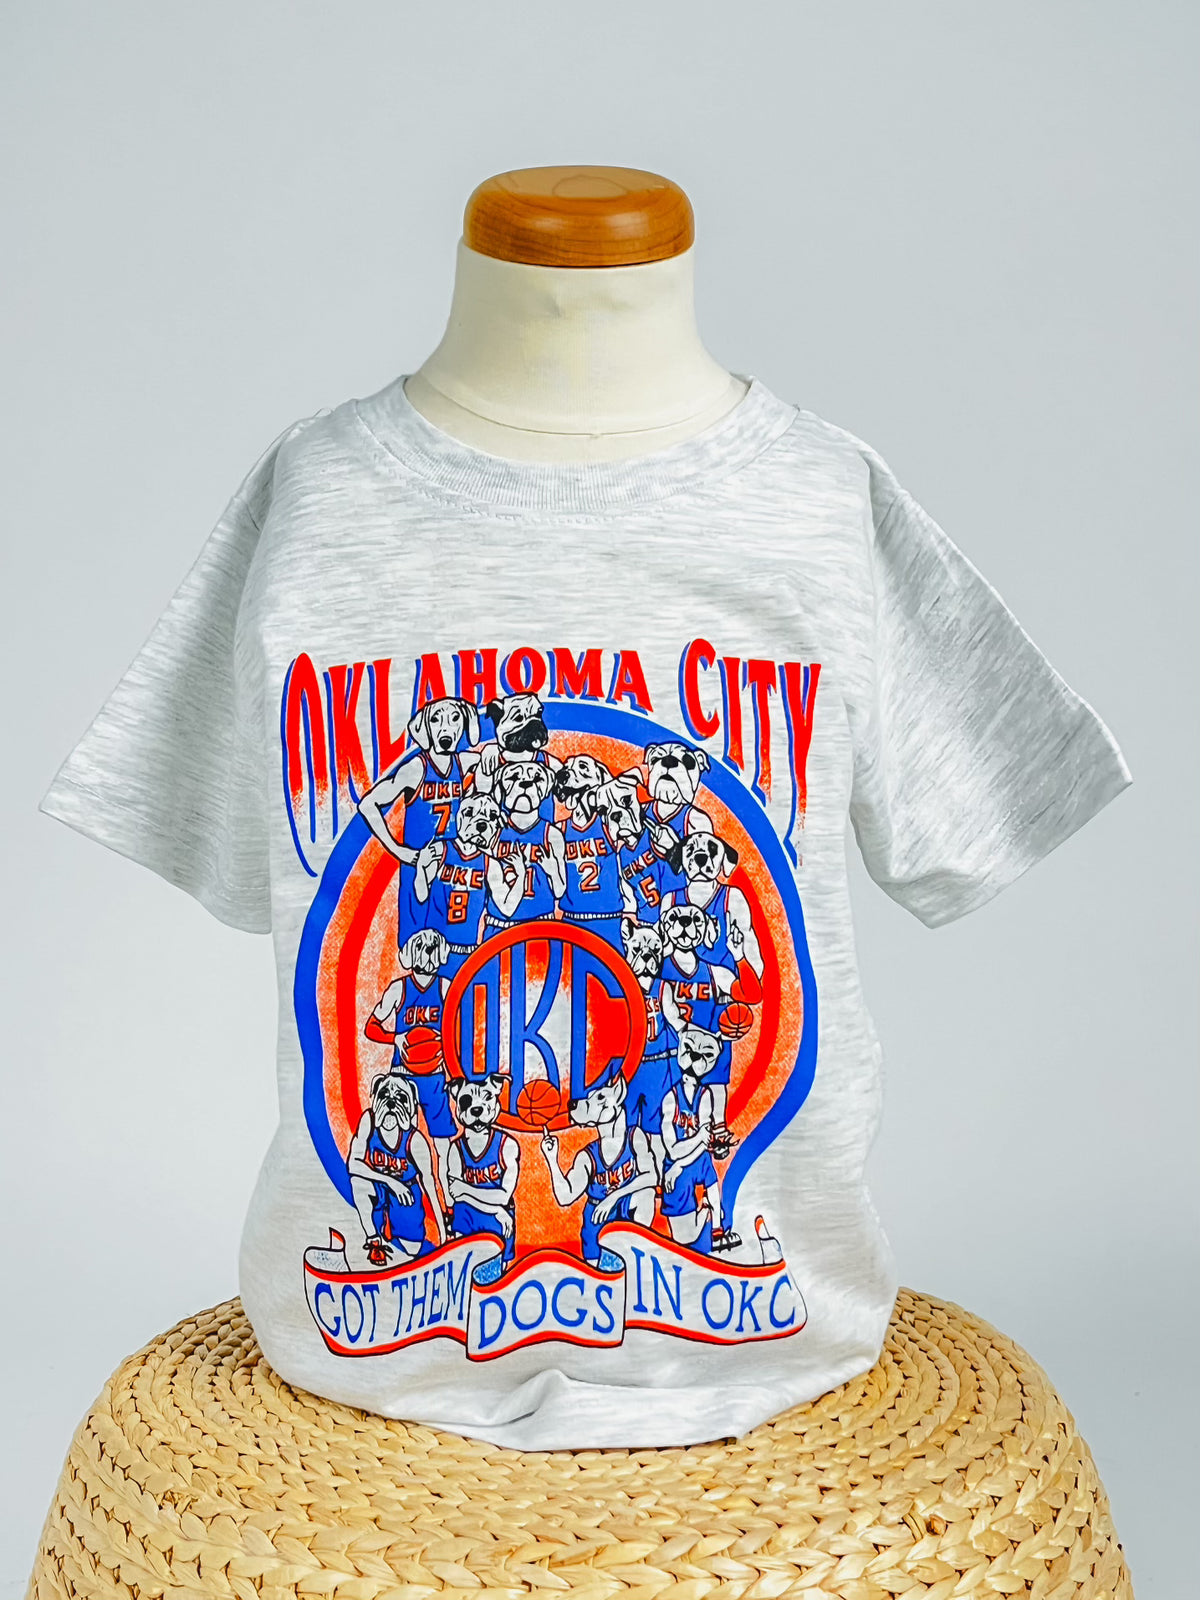 KIDS got them dogs in OKC basketball t-shirt ash - Trendy OKC Apparel at Lush Fashion Lounge Boutique in Oklahoma City